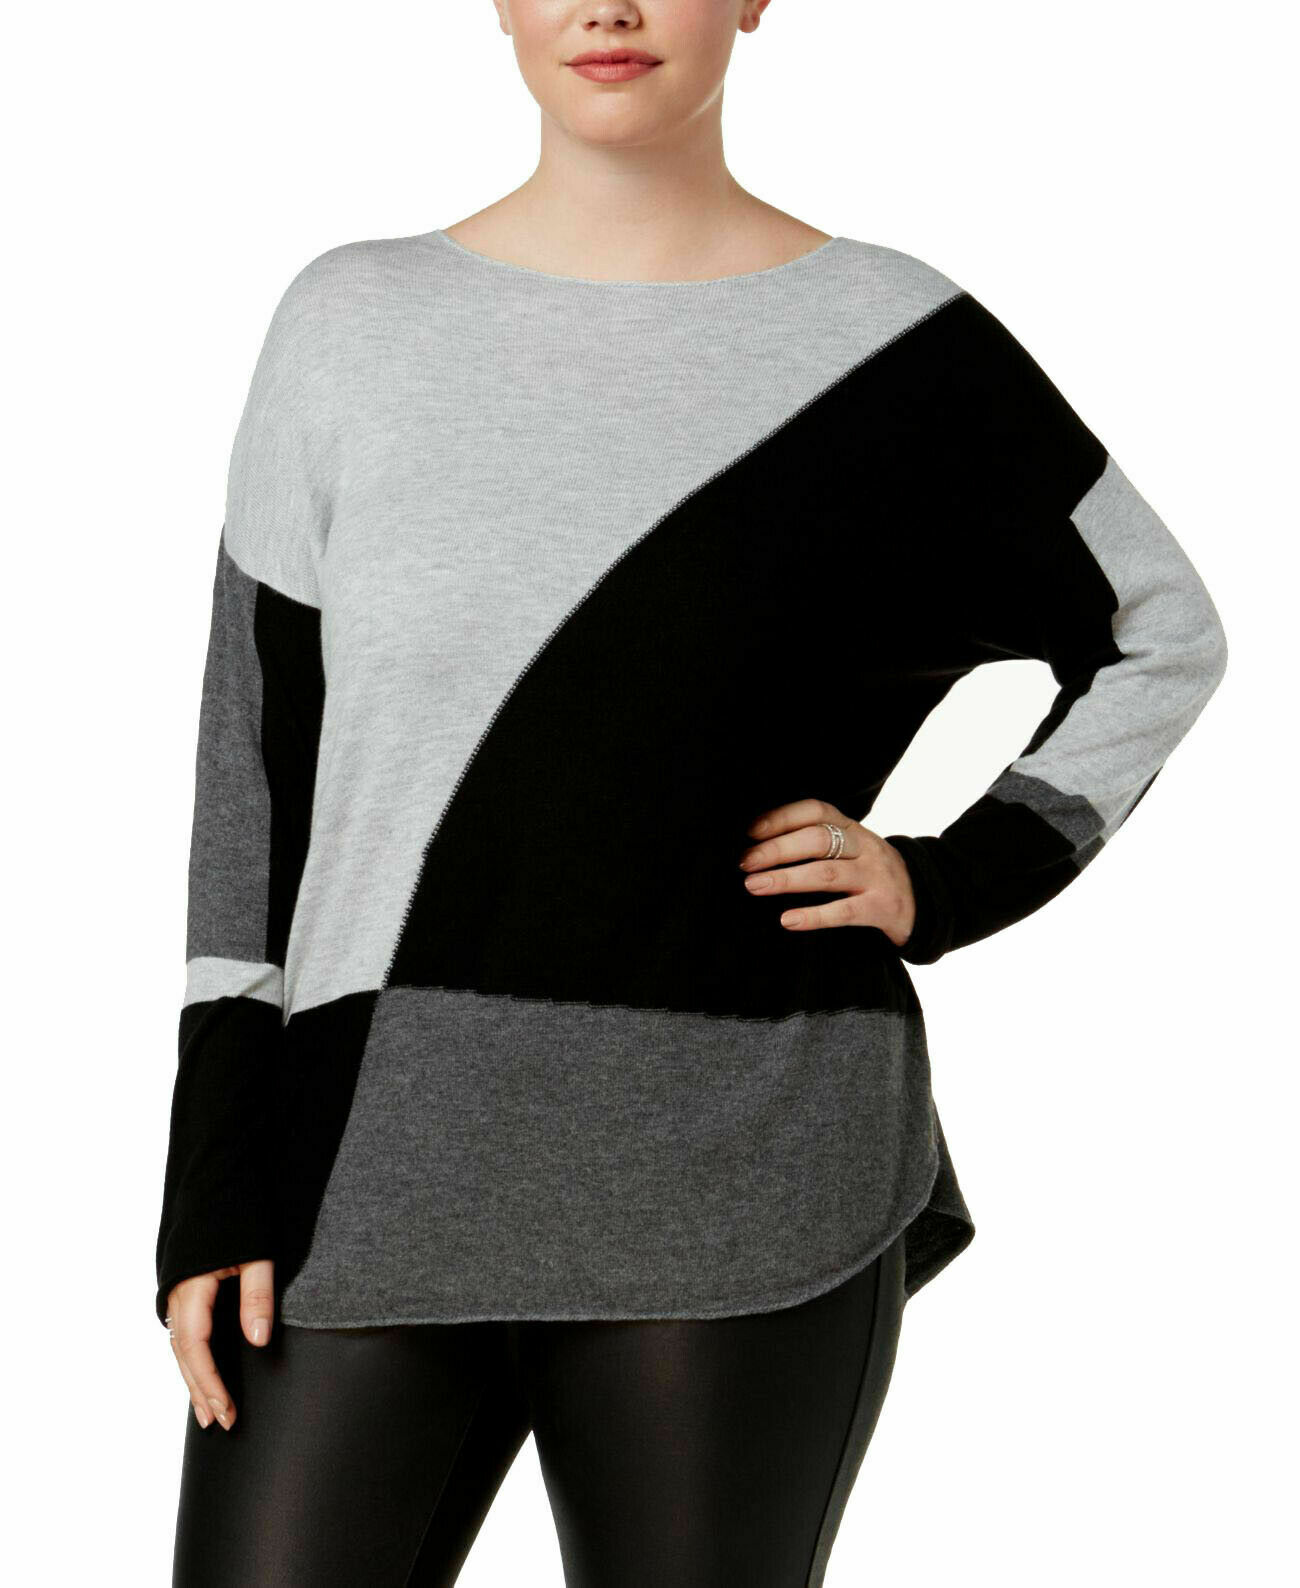 INC International Concepts - Plus Size Long-Sleeve High-Low Sweater in Grey Colorblock